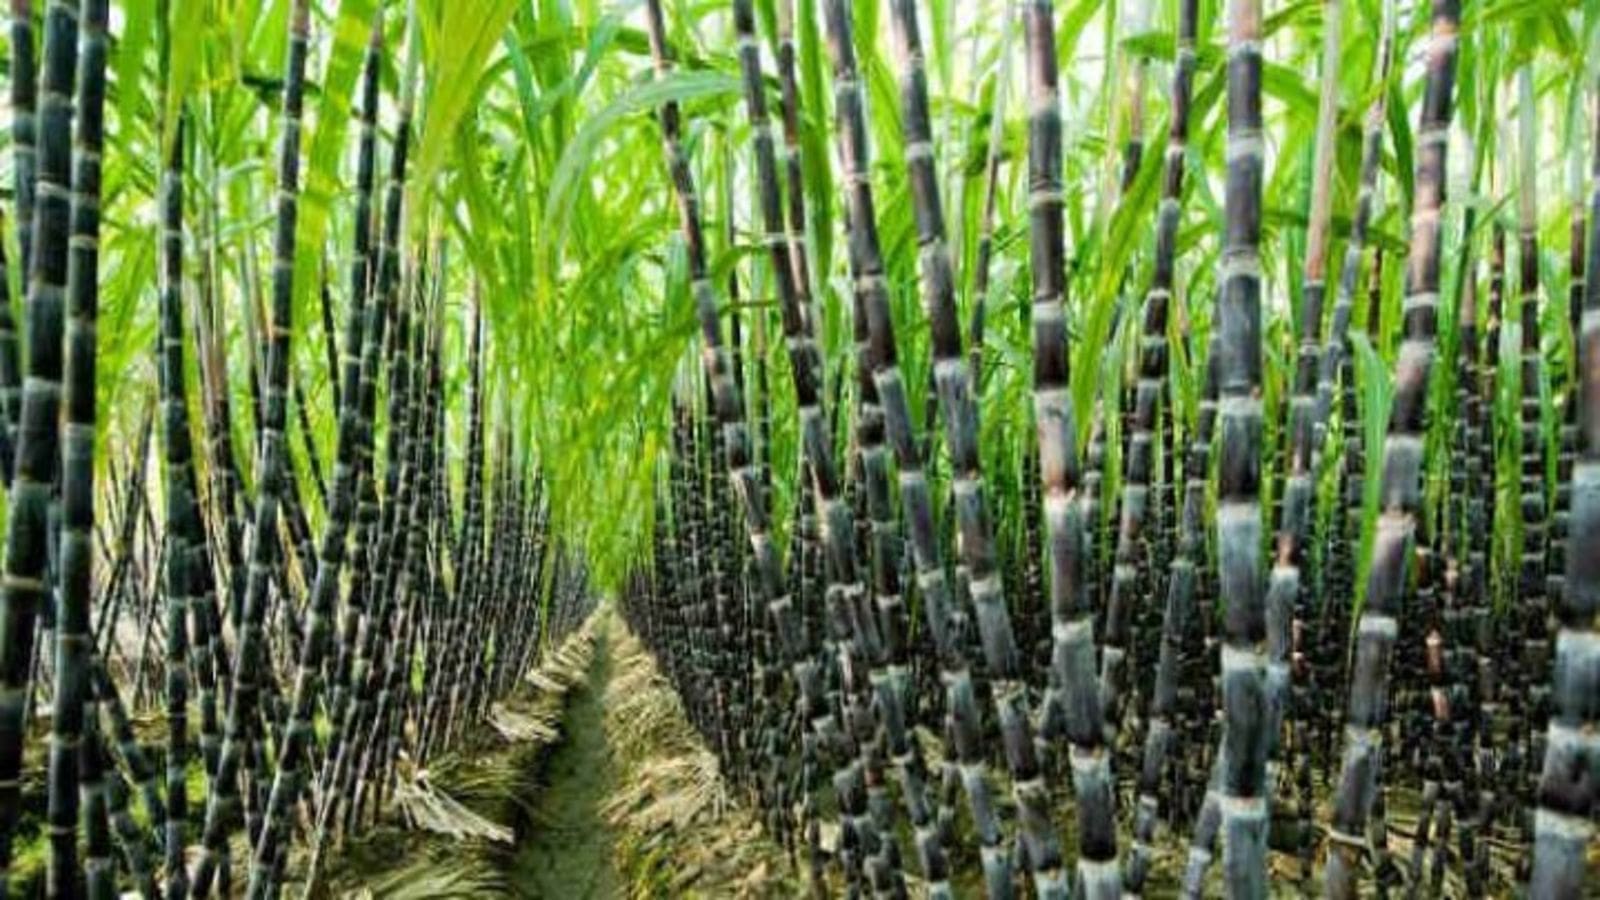 Nigeria’s National Sugar Development Council acquires ISO 9001:2015 certification